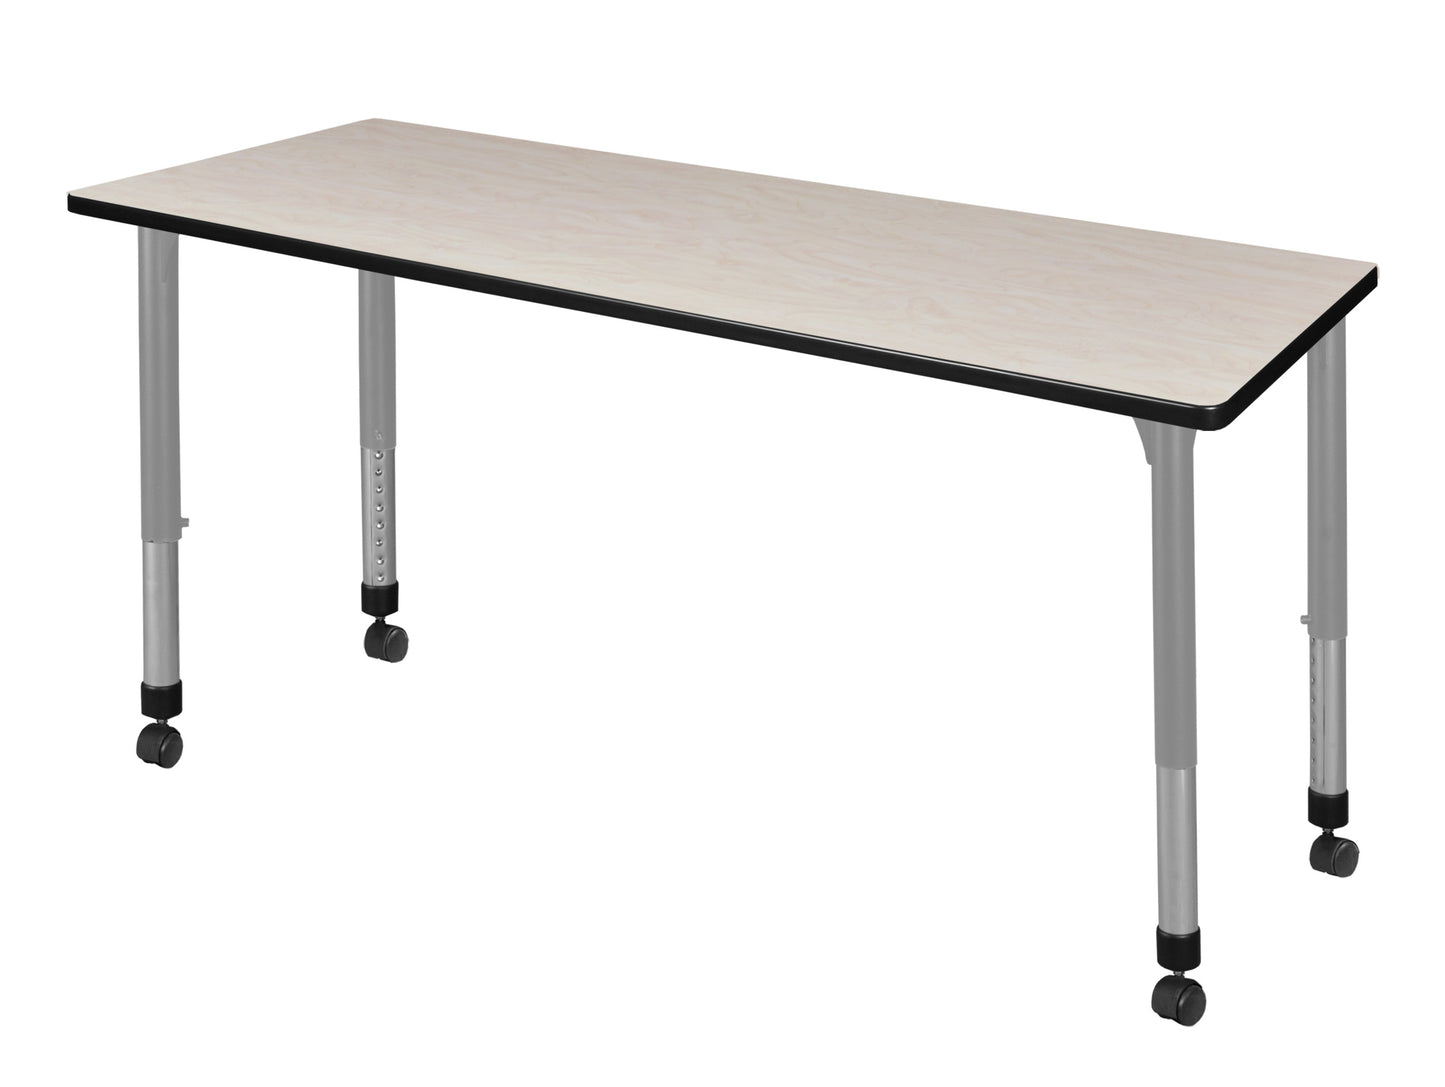 Regency Kee 72 x 24 in. Height Adjustable Mobile Classroom Activity Table